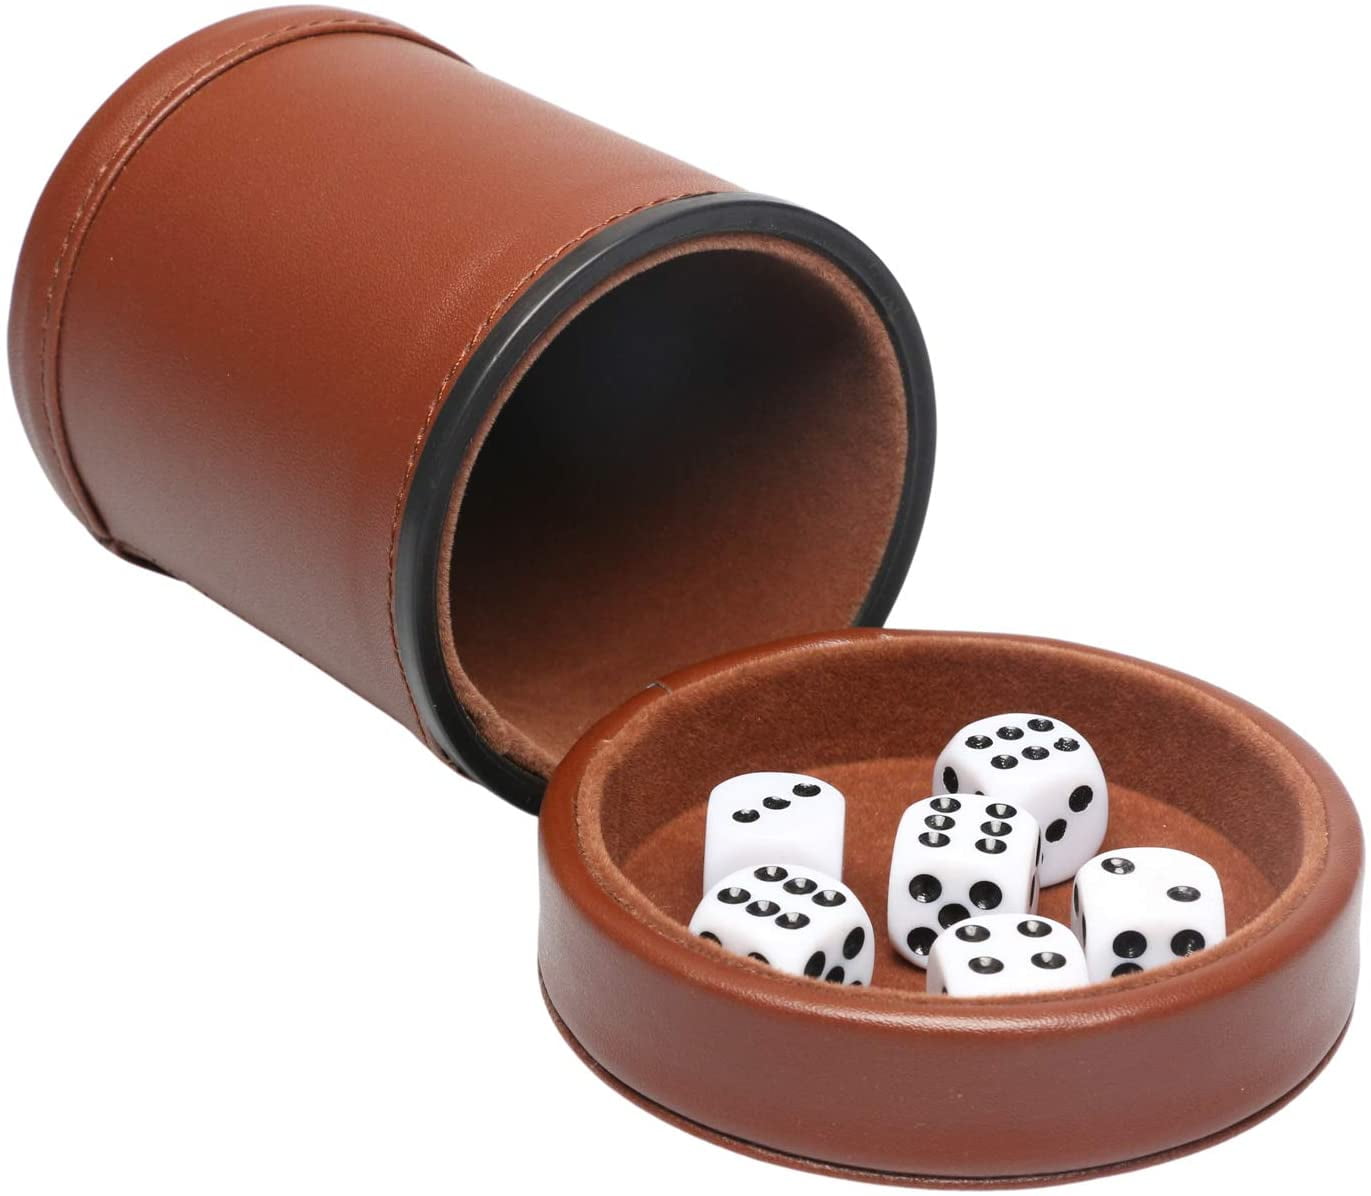 Leather Dice Cup Shaker for yahtzee Party Home Personalized Stitched Cup 